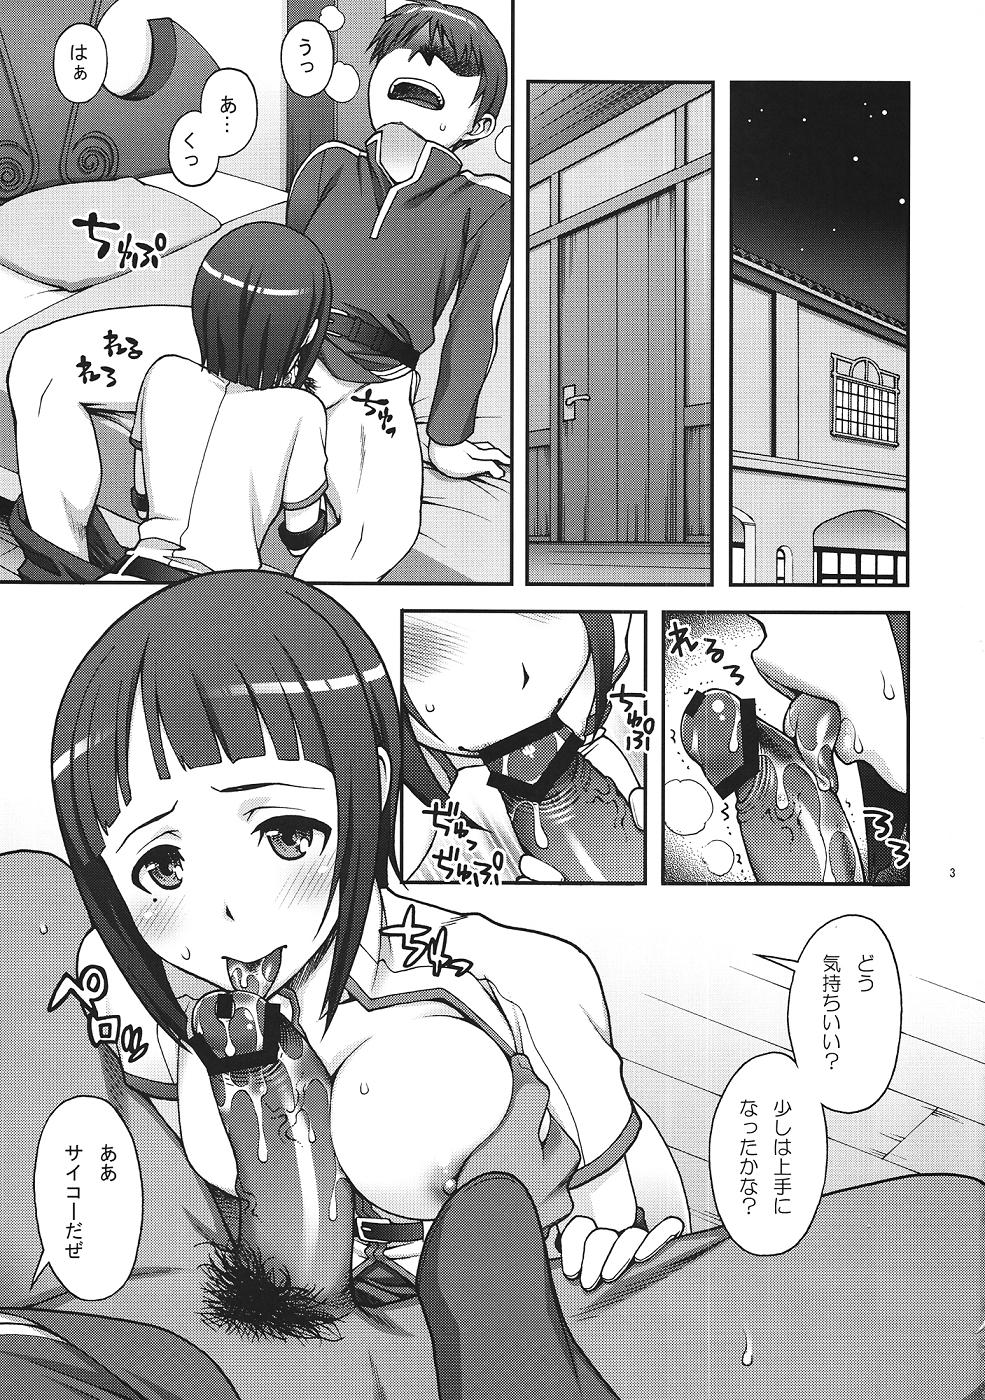 Chacal Delphinium Madonna - Sword art online Smoking - Page 2